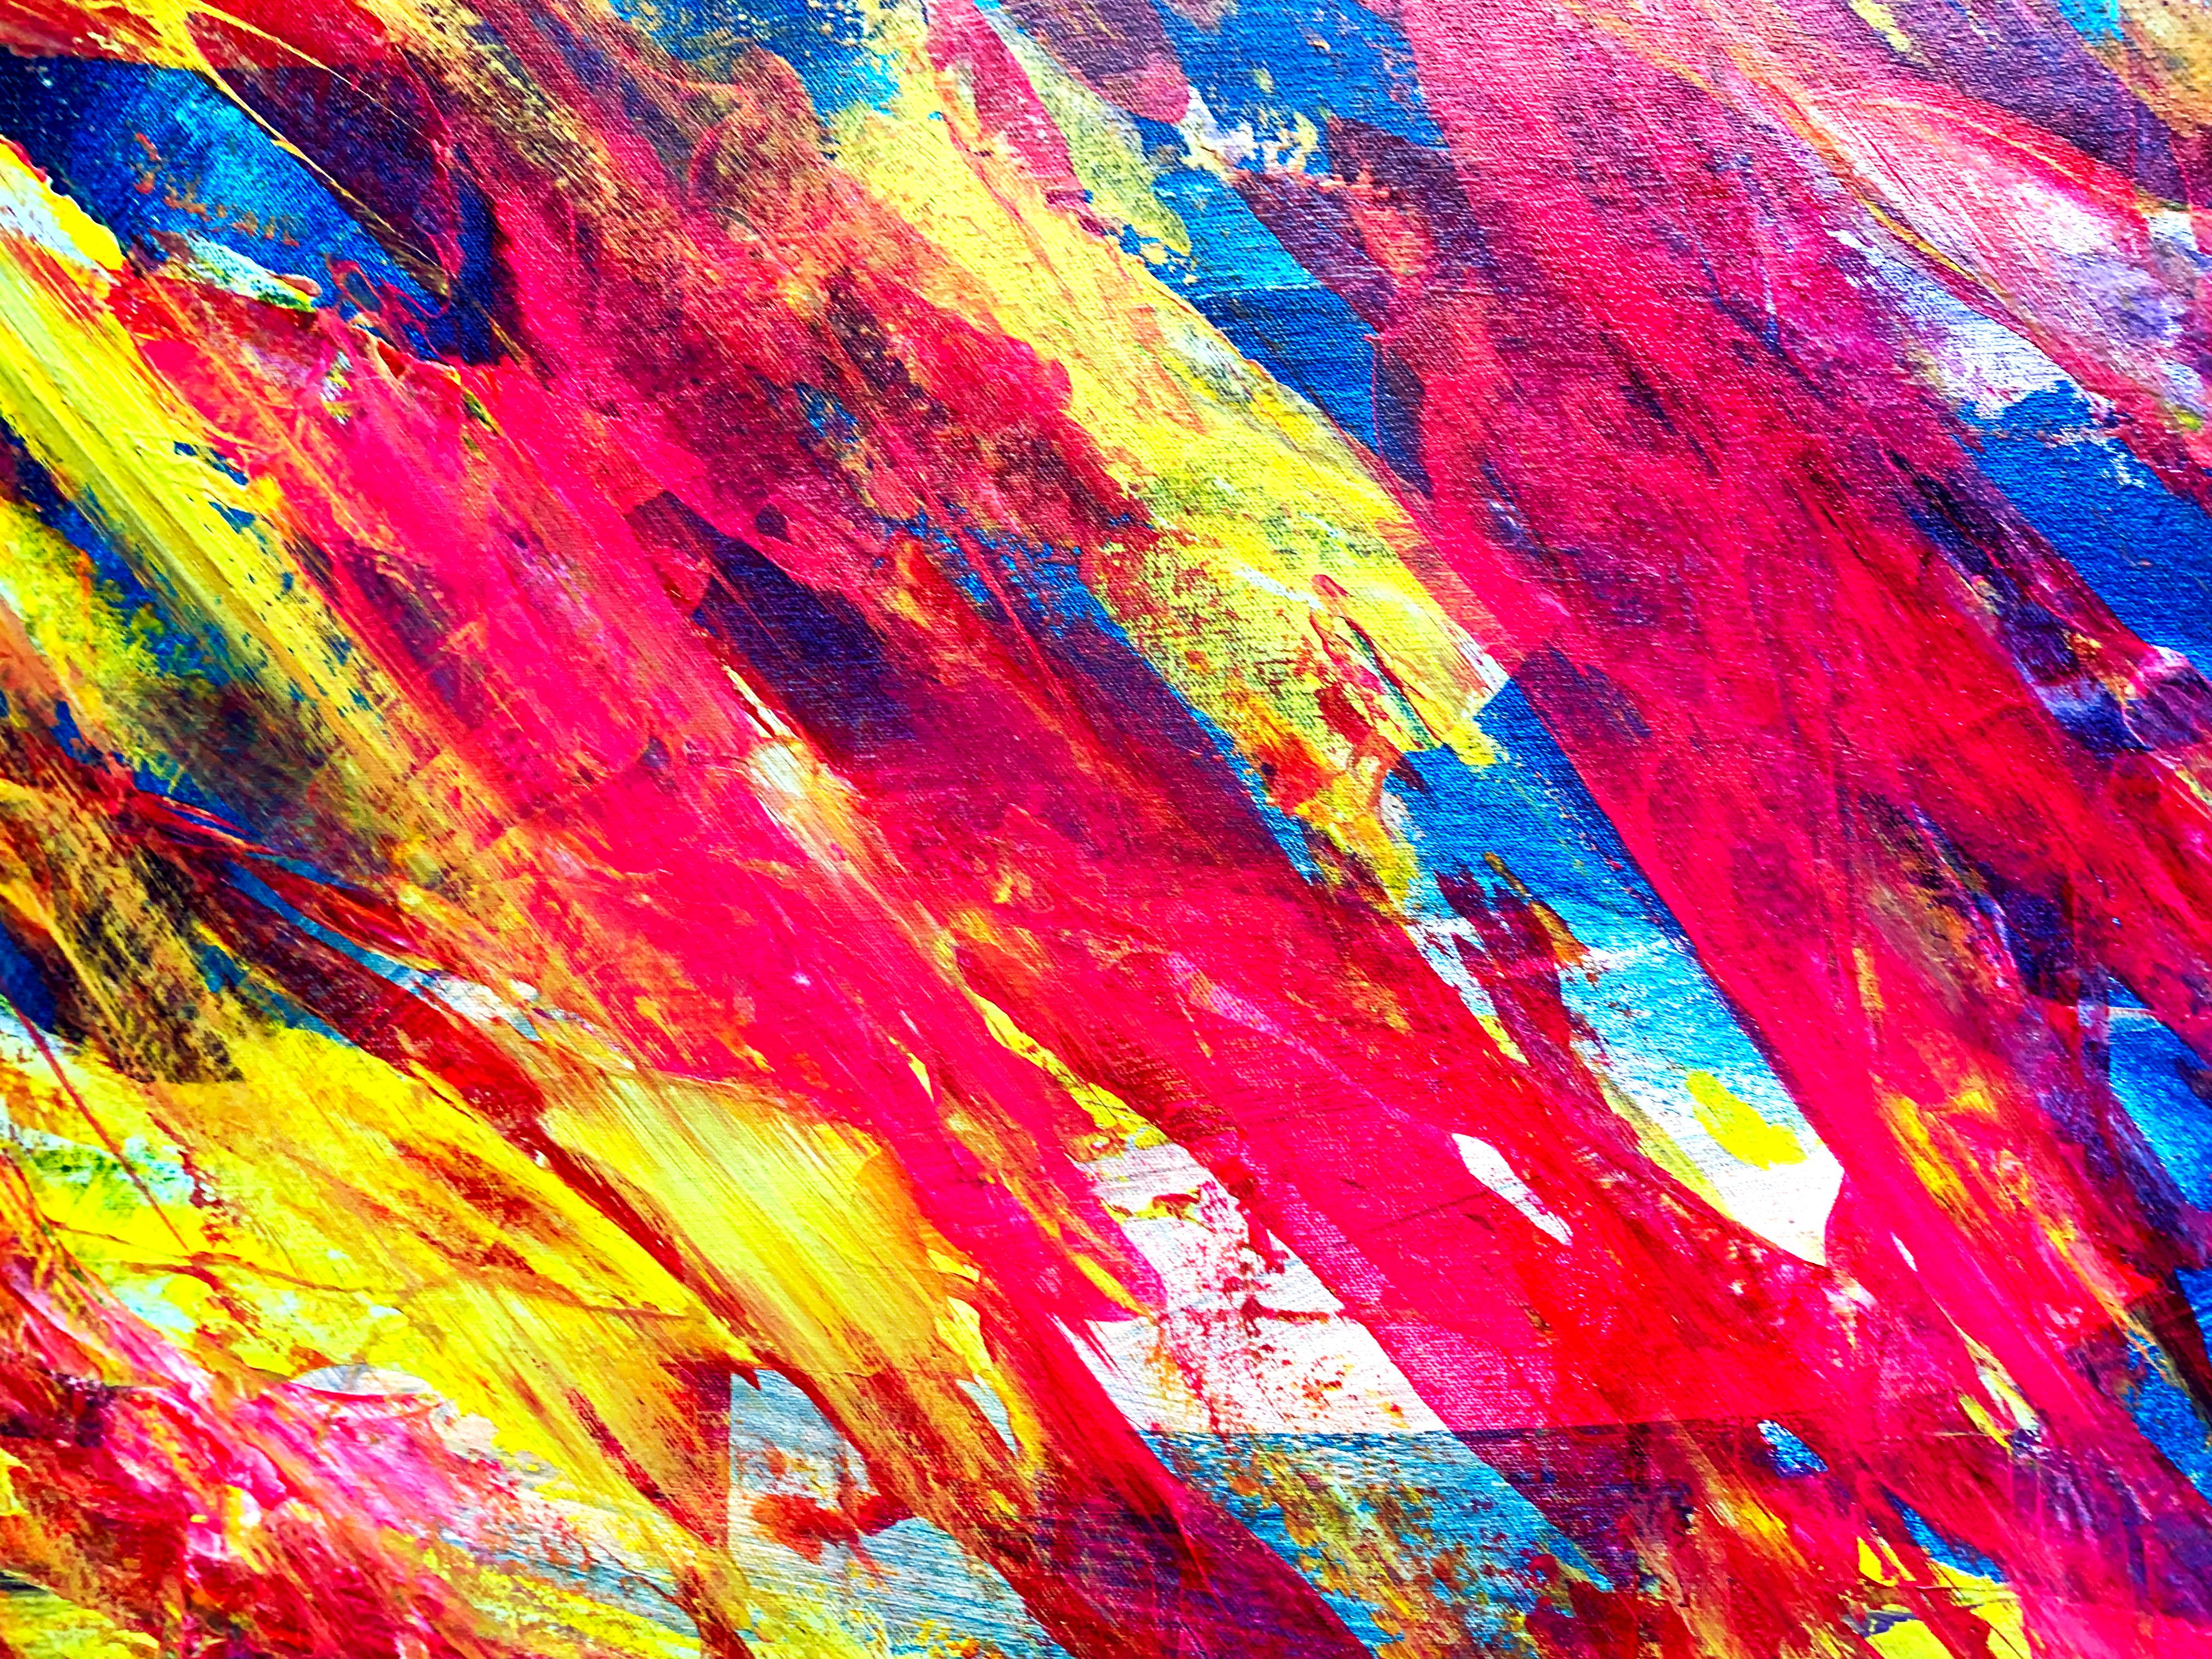 Colour Band  - Painting by Estelle Asmodelle